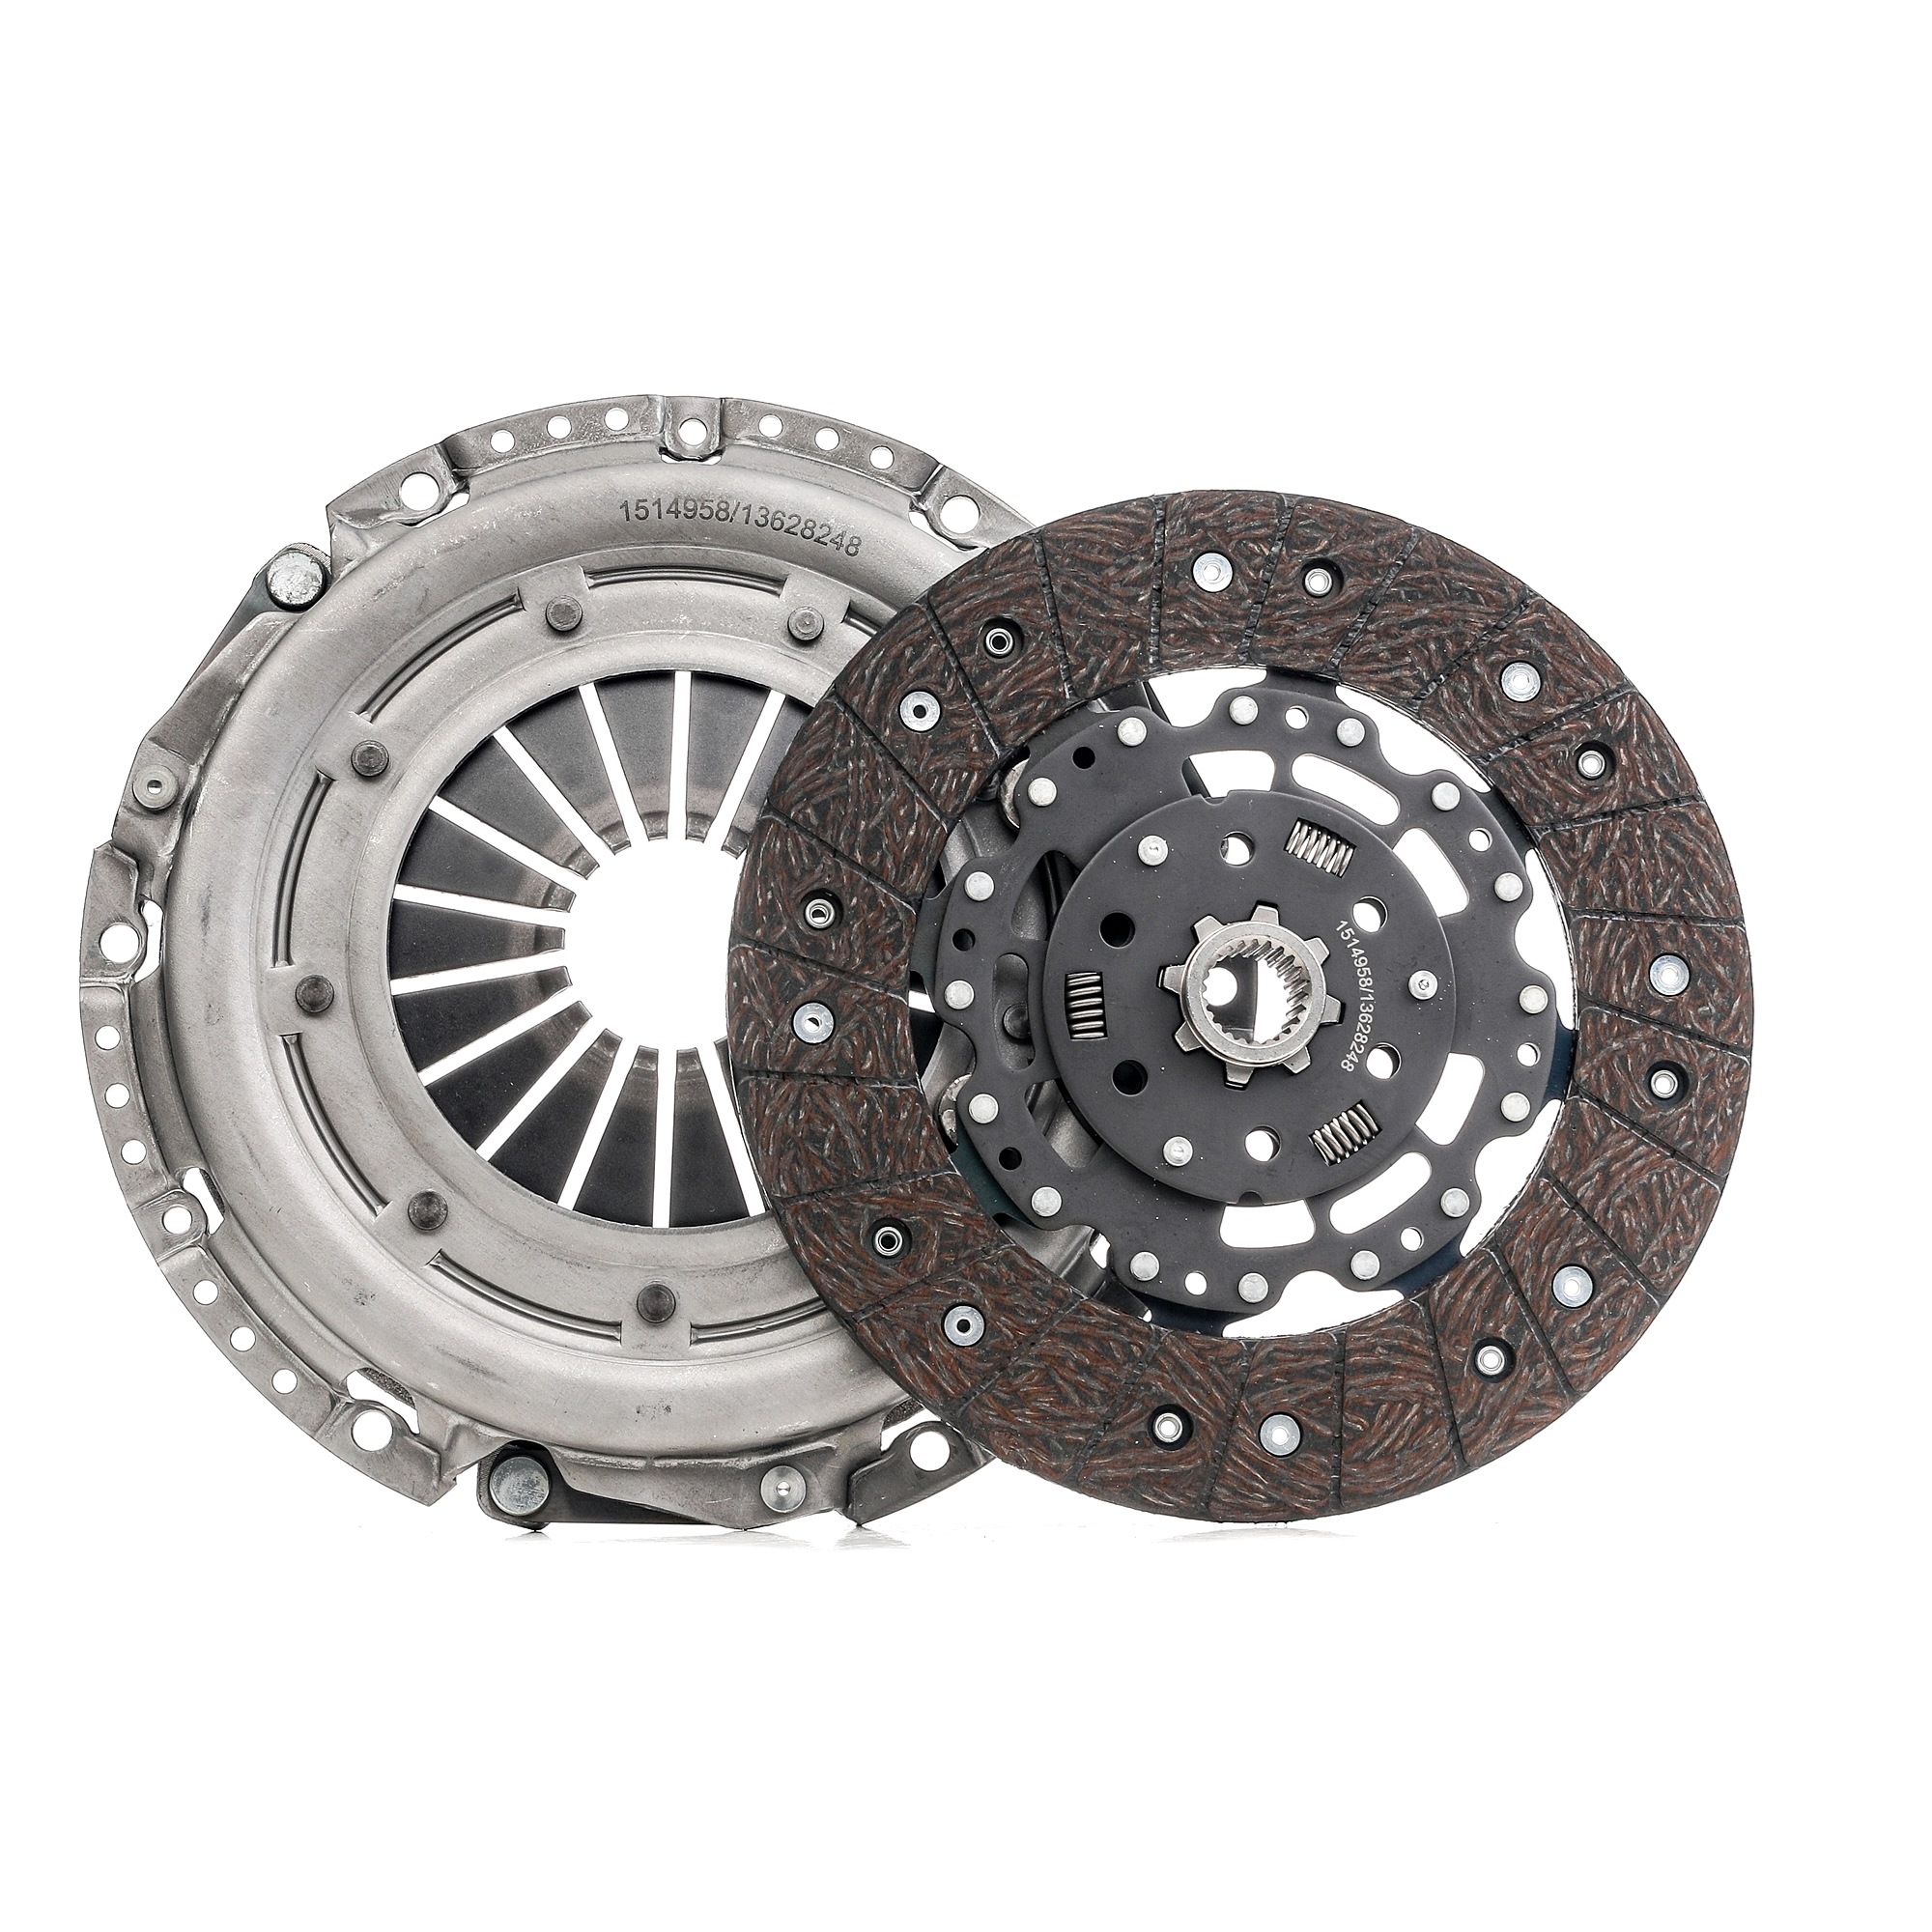 RIDEX 479C0197 Clutch kit for engines with dual-mass flywheel, two-piece, without clutch release bearing, Check and replace dual-mass flywheel if necessary., 240mm